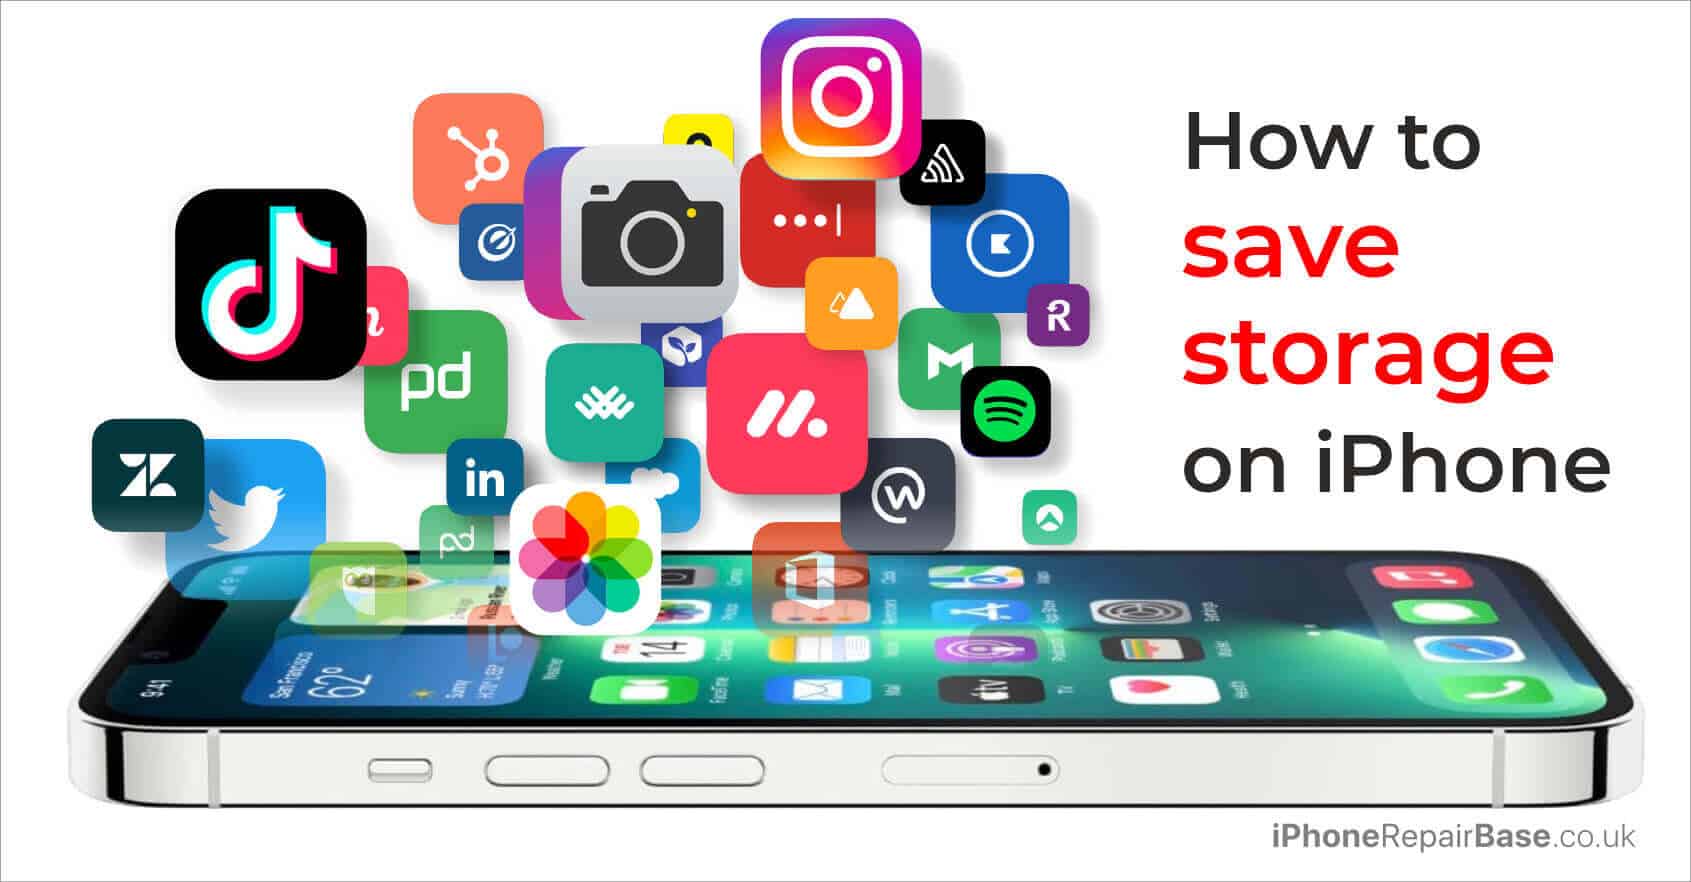 Best ways to save storage on iPhone featured image